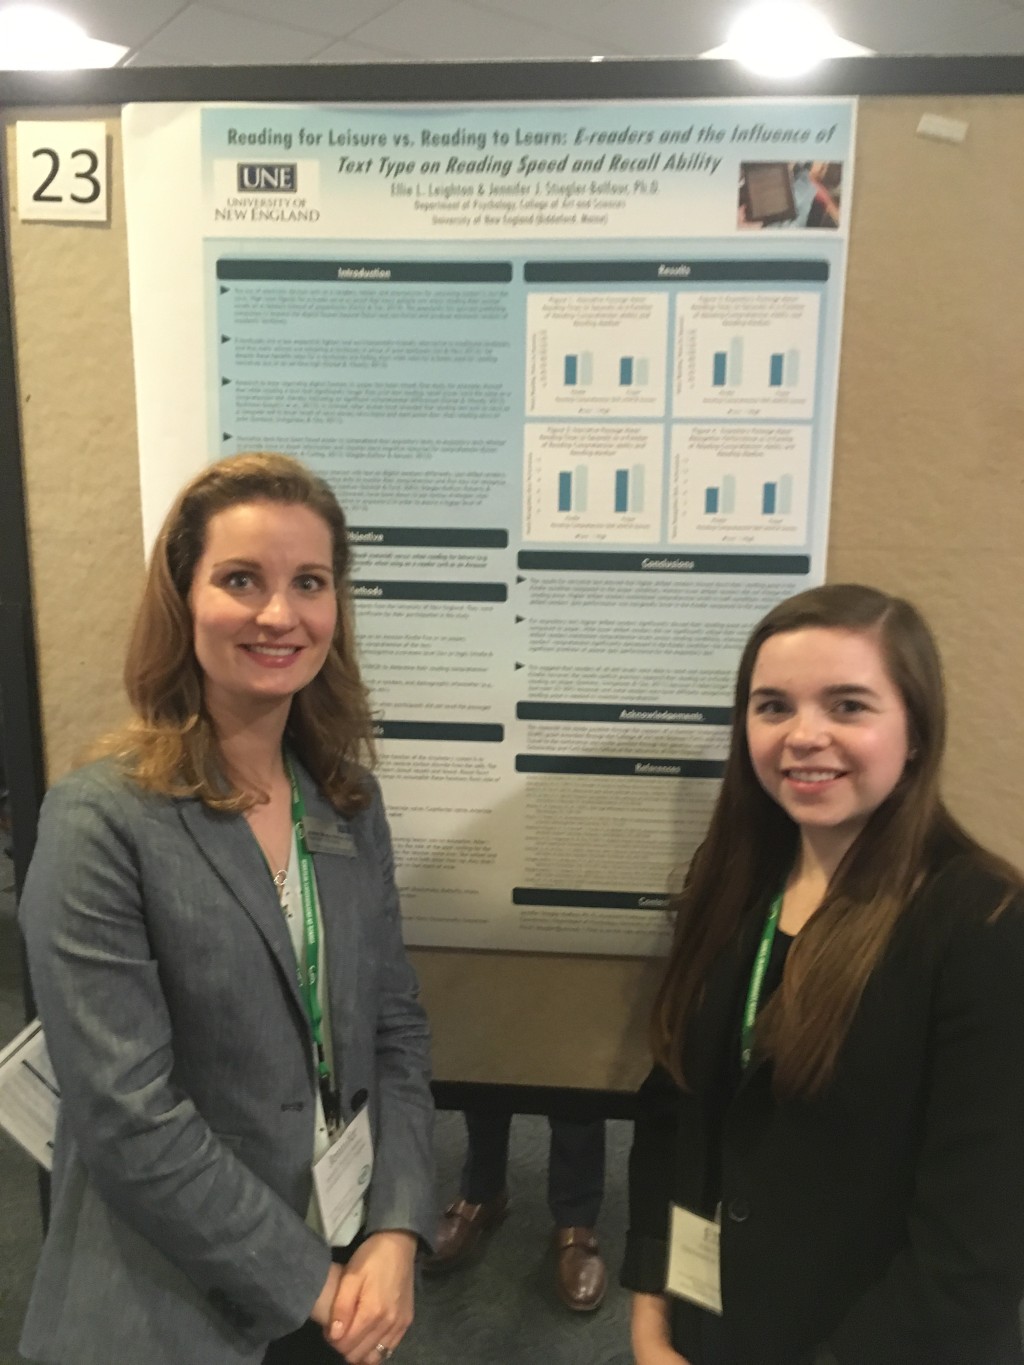 Jennifer Stiegler-Balfour and Ellie Leighton with their research poster on E-readers